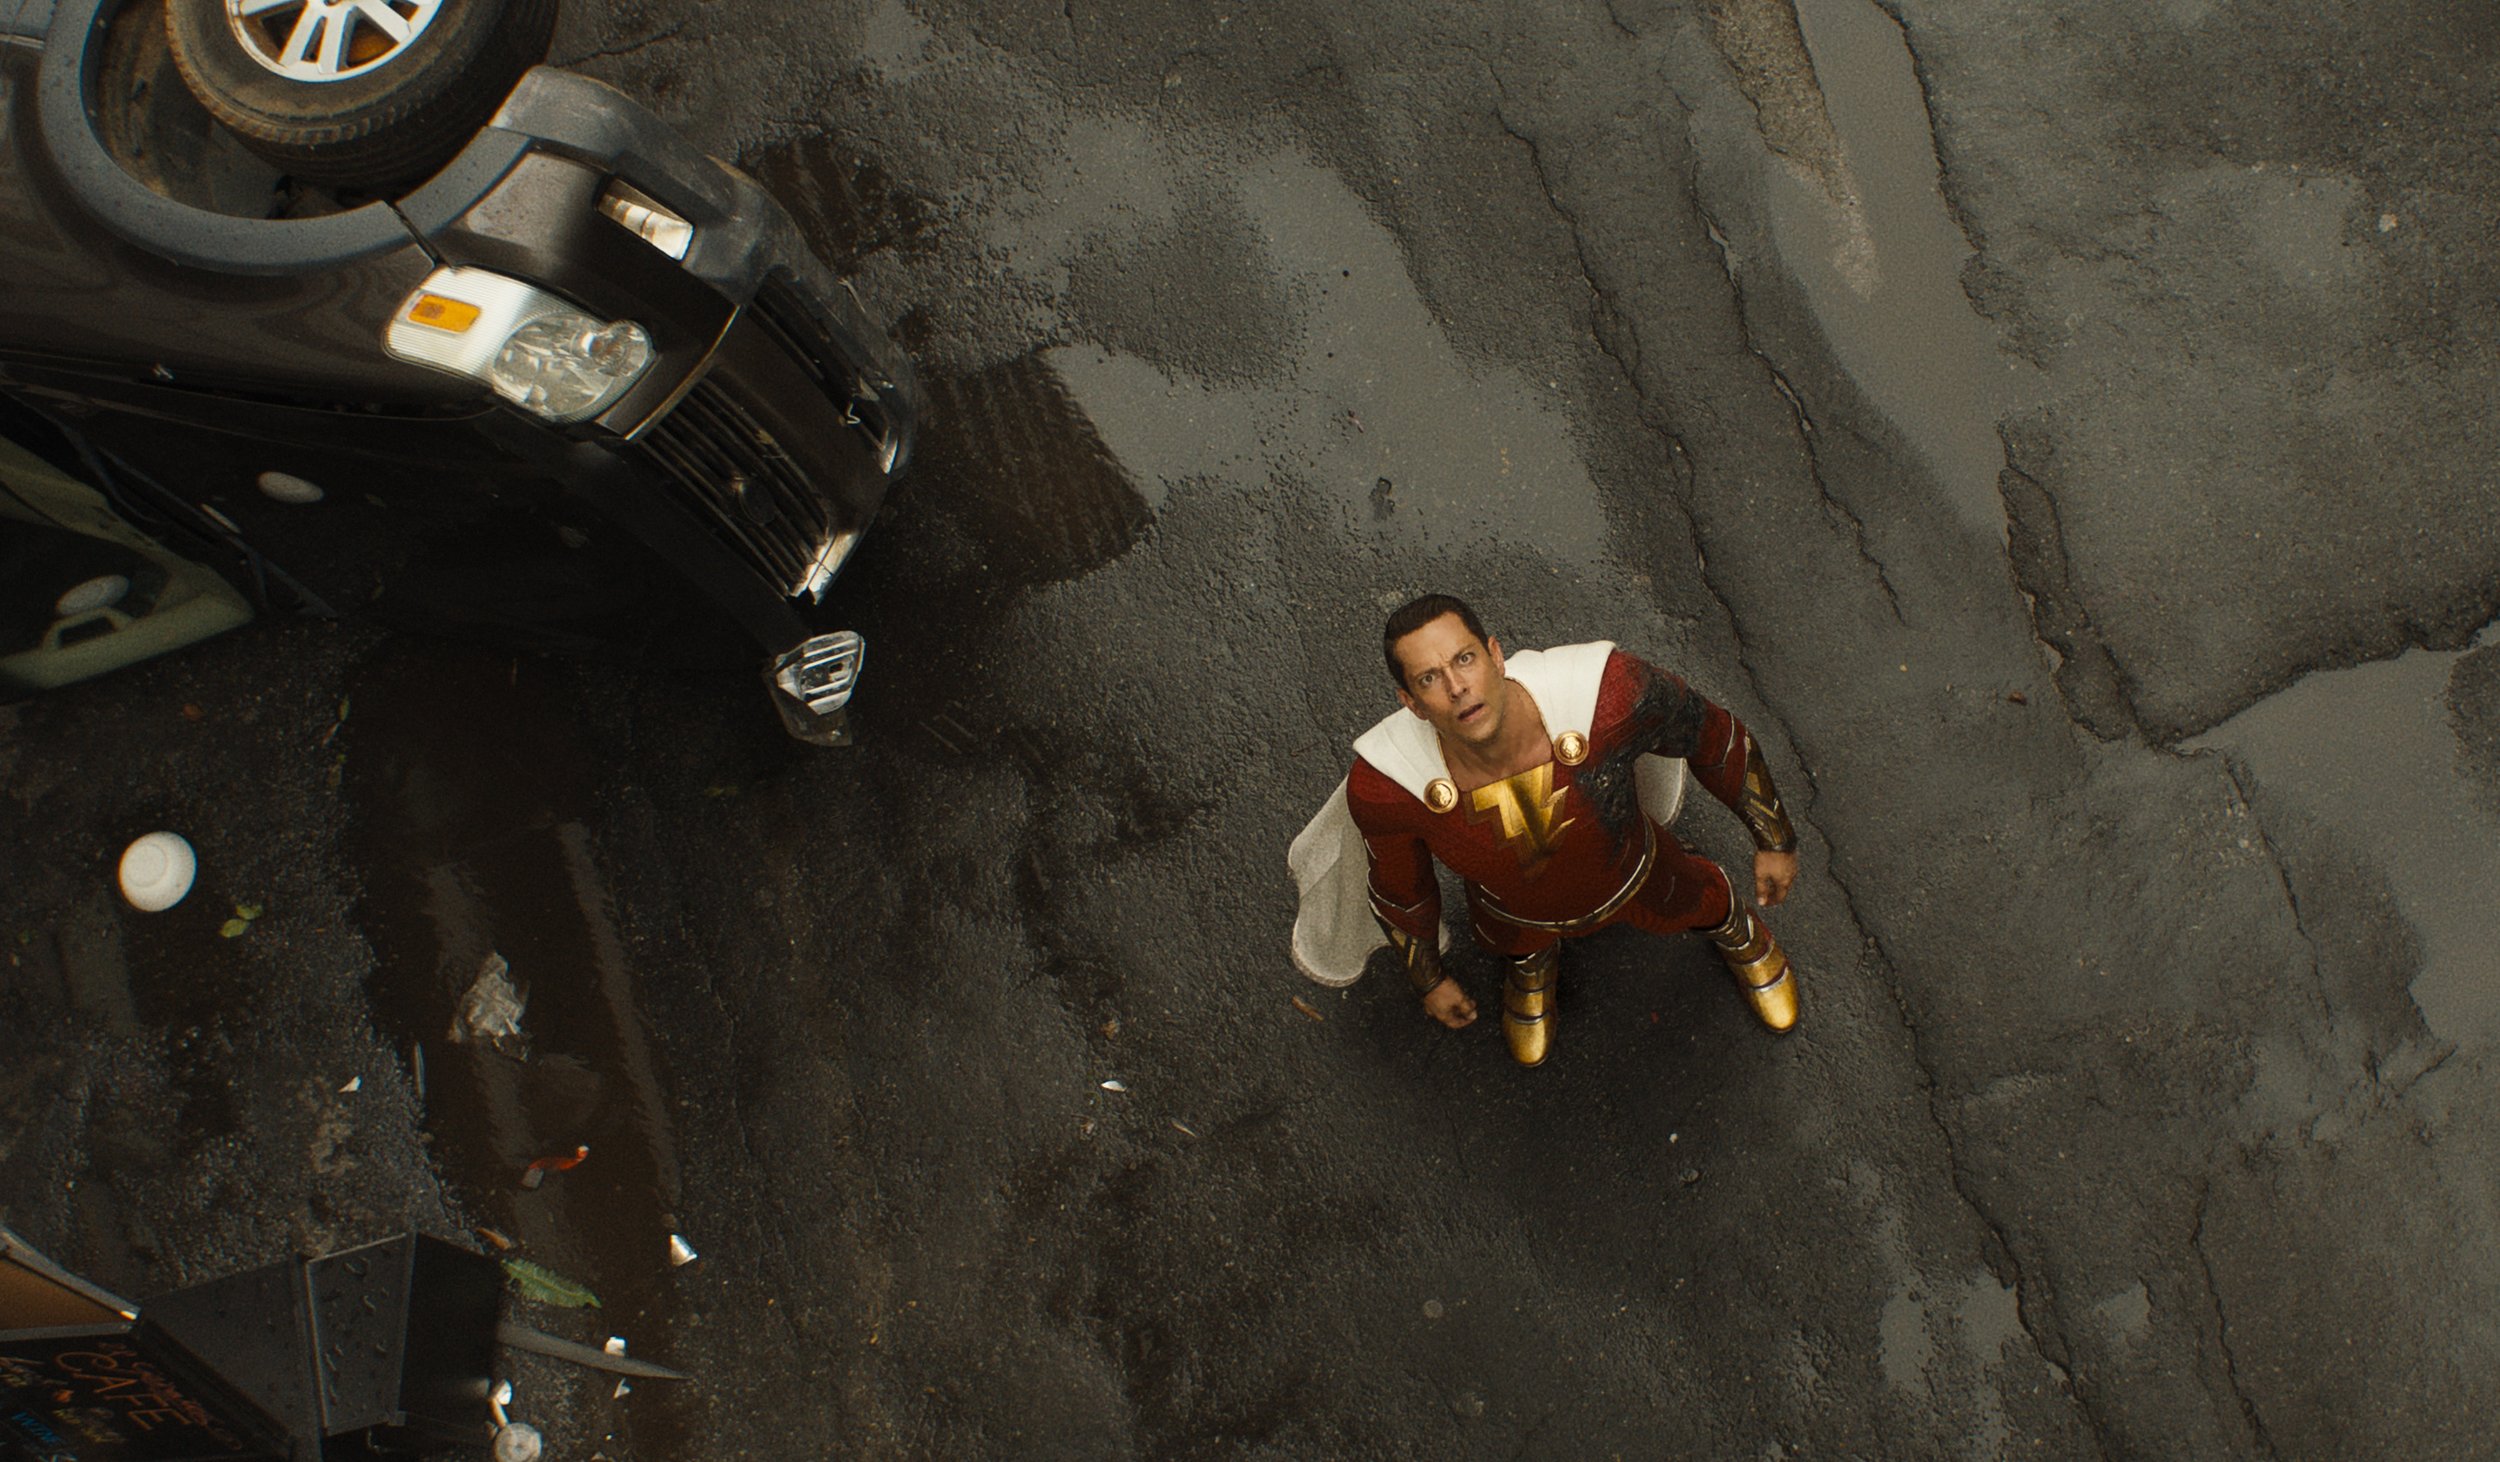 Shazam 2's Post-Credits Scenes Set Up A Future In The New DC Universe